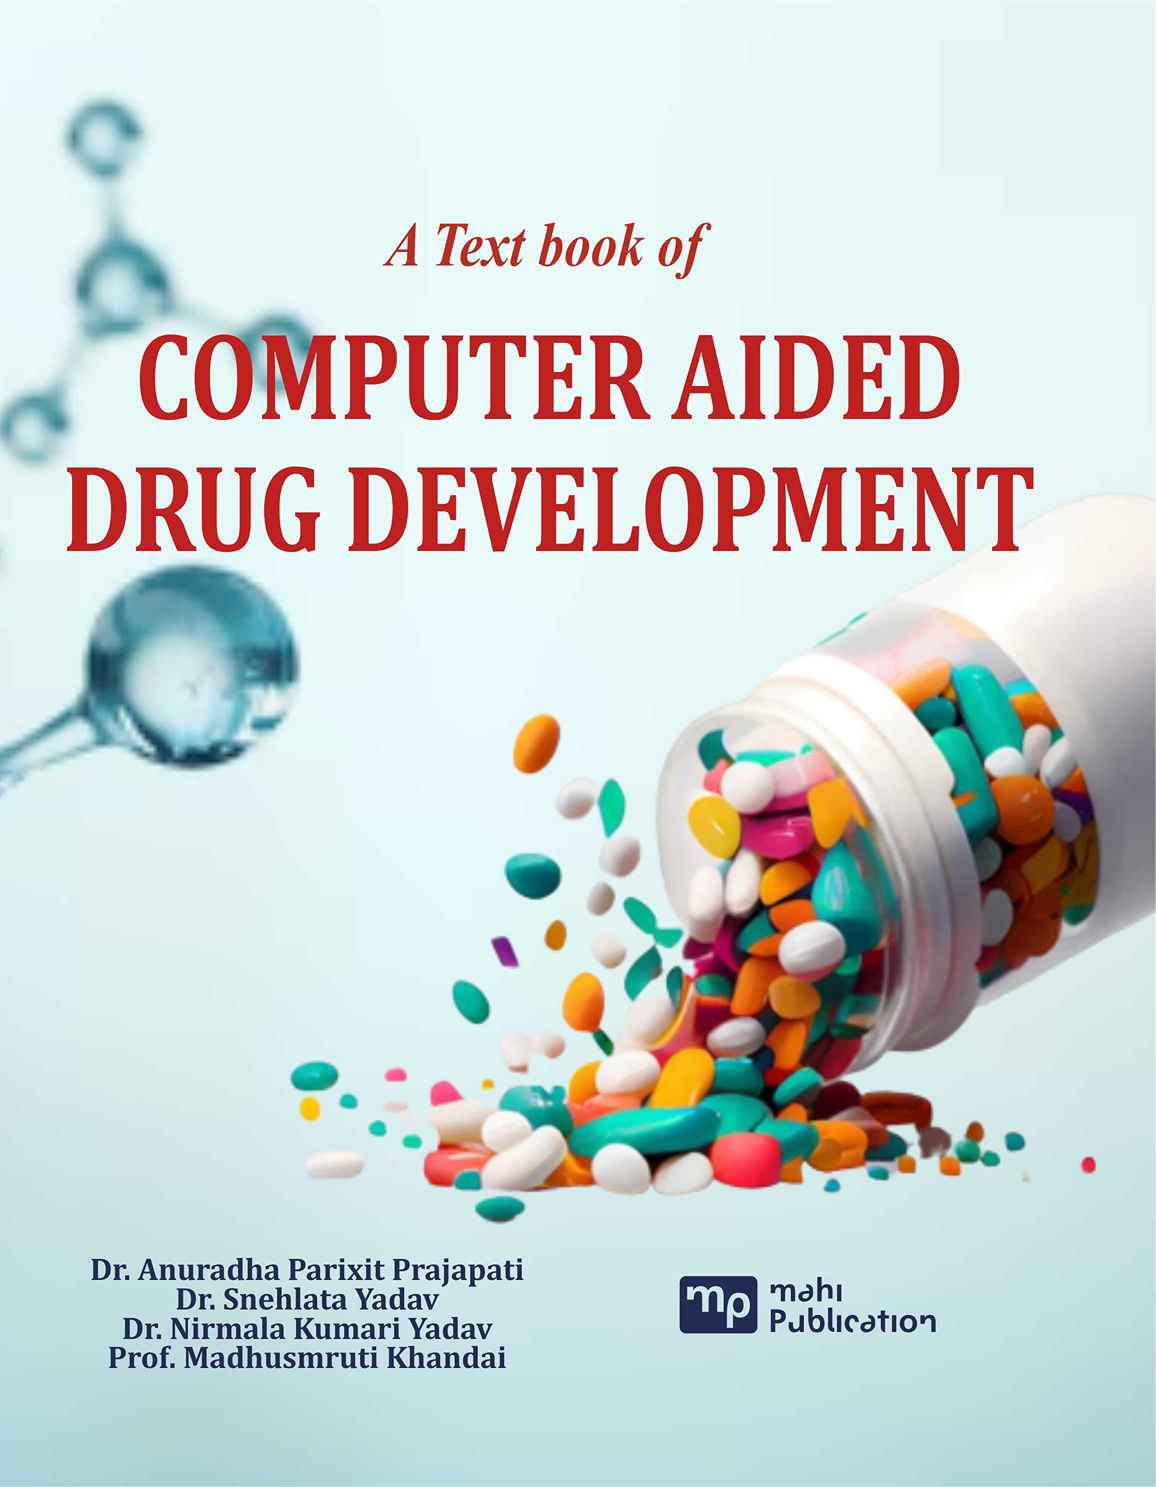 A Text book of COMPUTER AIDED DRUG DEVELOPMENT